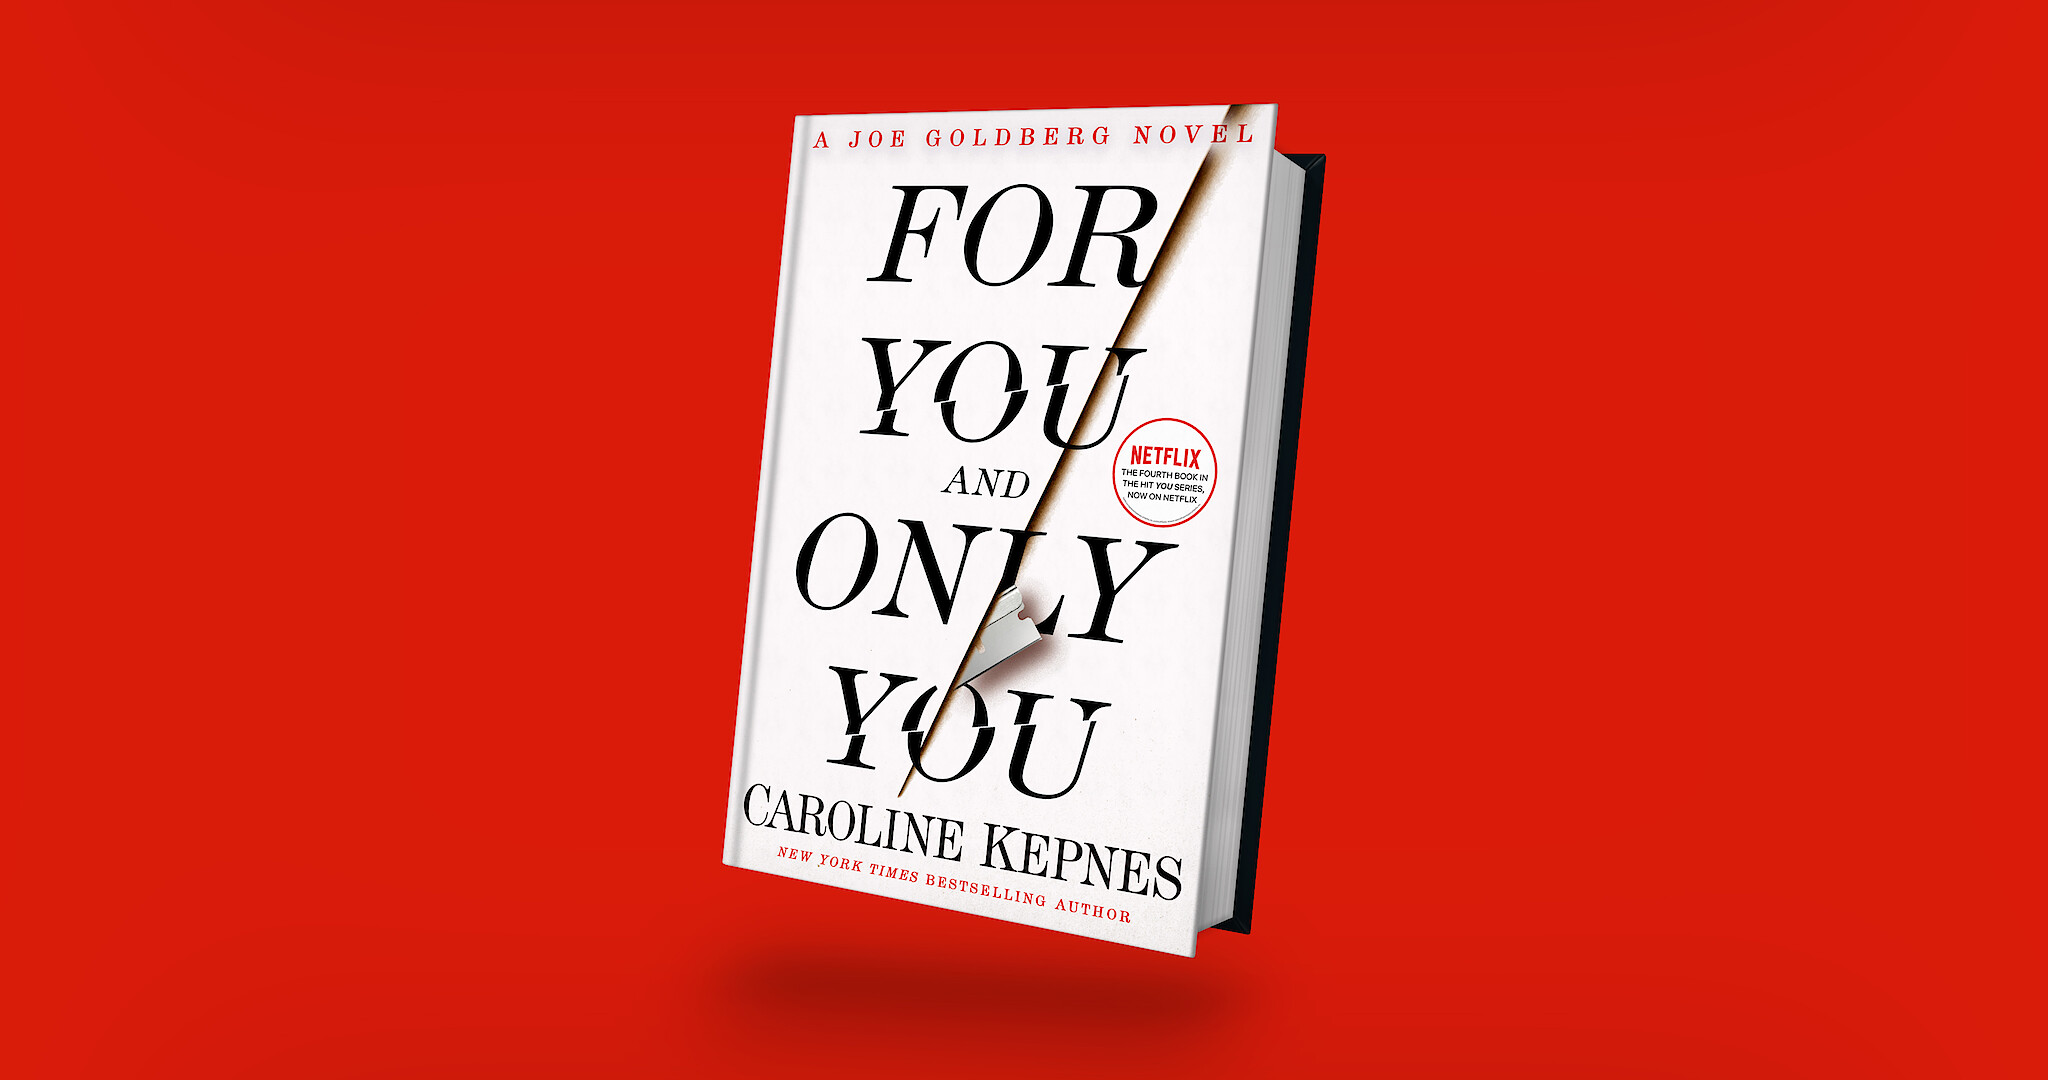 Caroline Kepnes on For You and Only You Book and You Season 4 - Netflix  Tudum